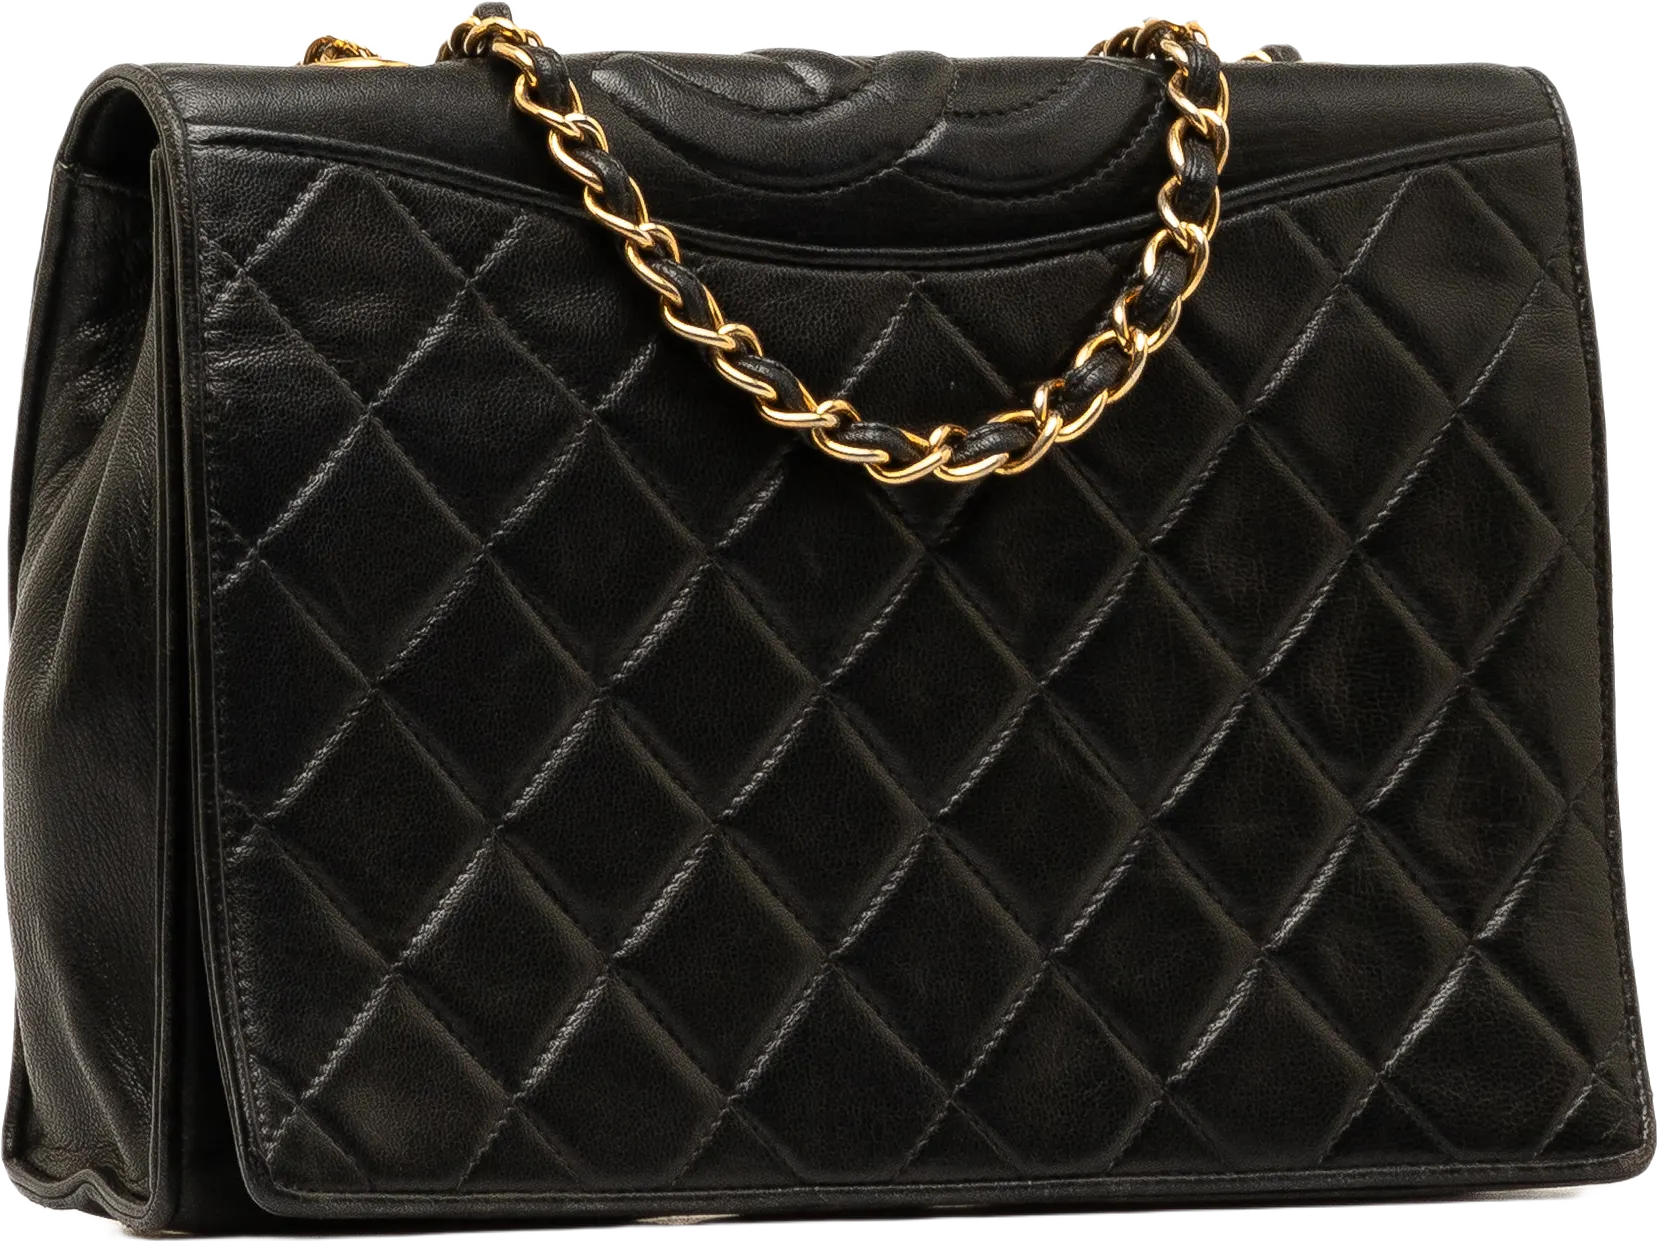 Chanel Cc Quilted Lambskin Full Flap